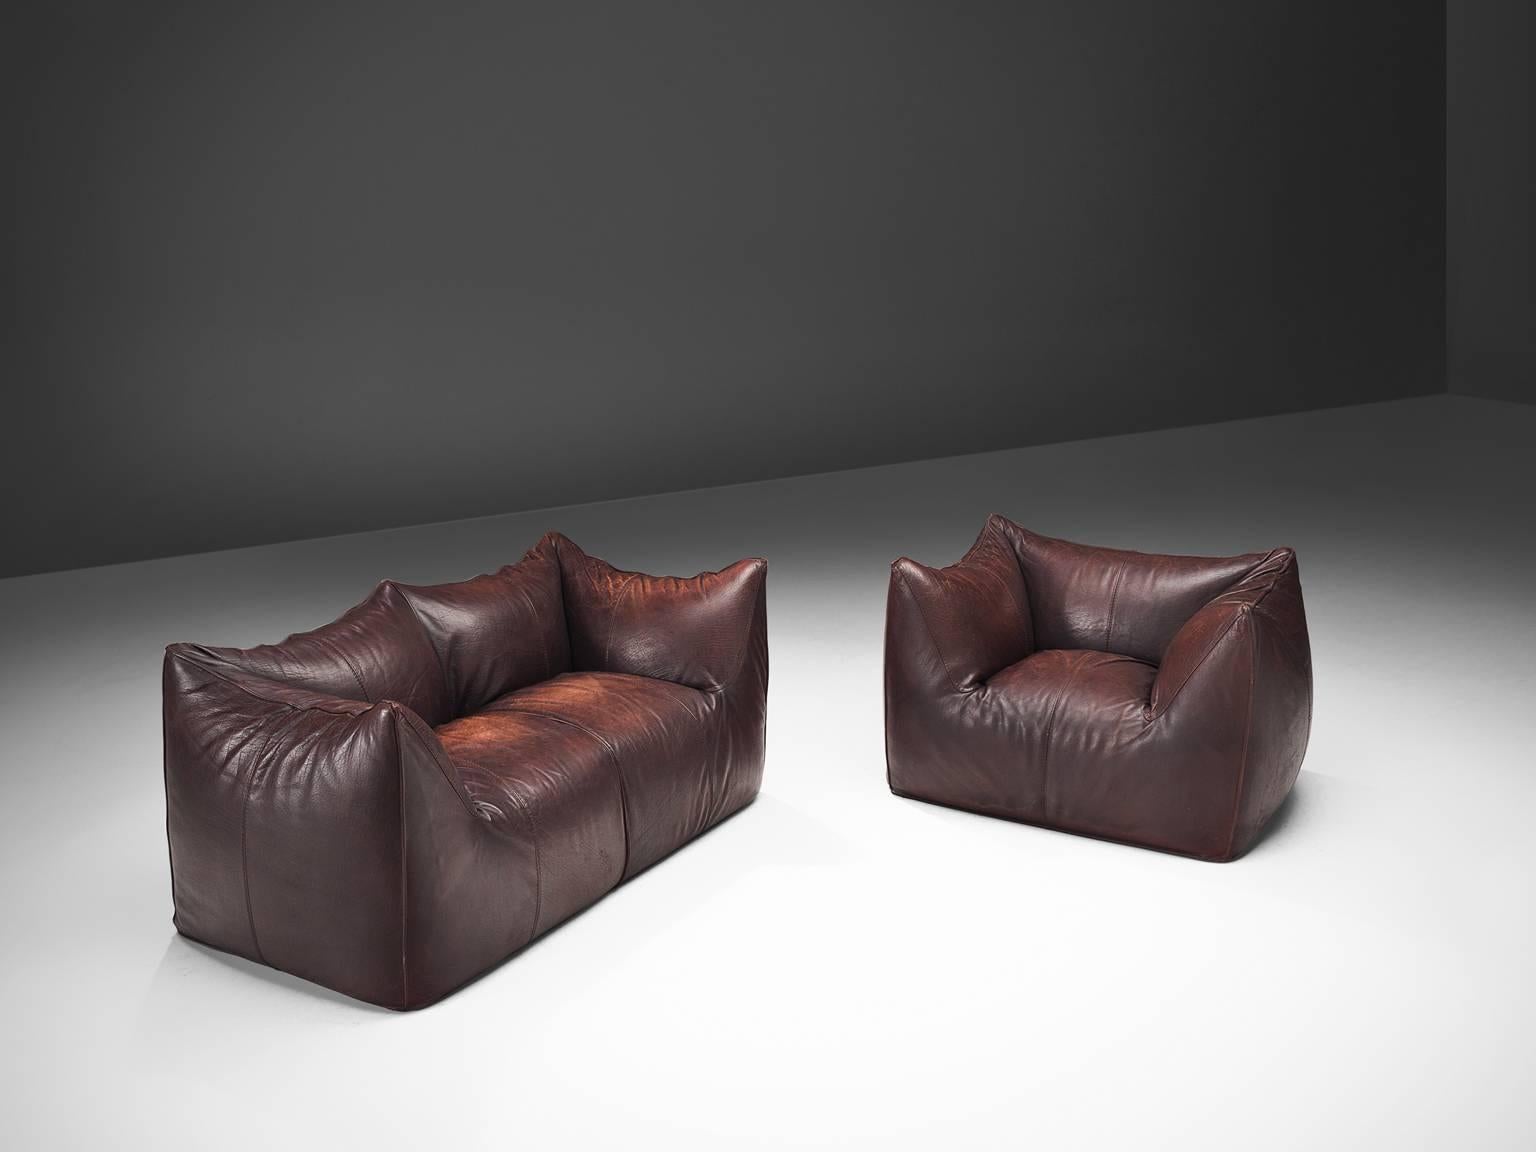 Mario Bellini for B&B Italia, 'Le Bambole' living room set, brown leather, Italy, 1972. 

This comfortable dark brown set is bulky and playful, shaped as if it is merely a large cushion and the accompanying feeling is the same. It is designed by